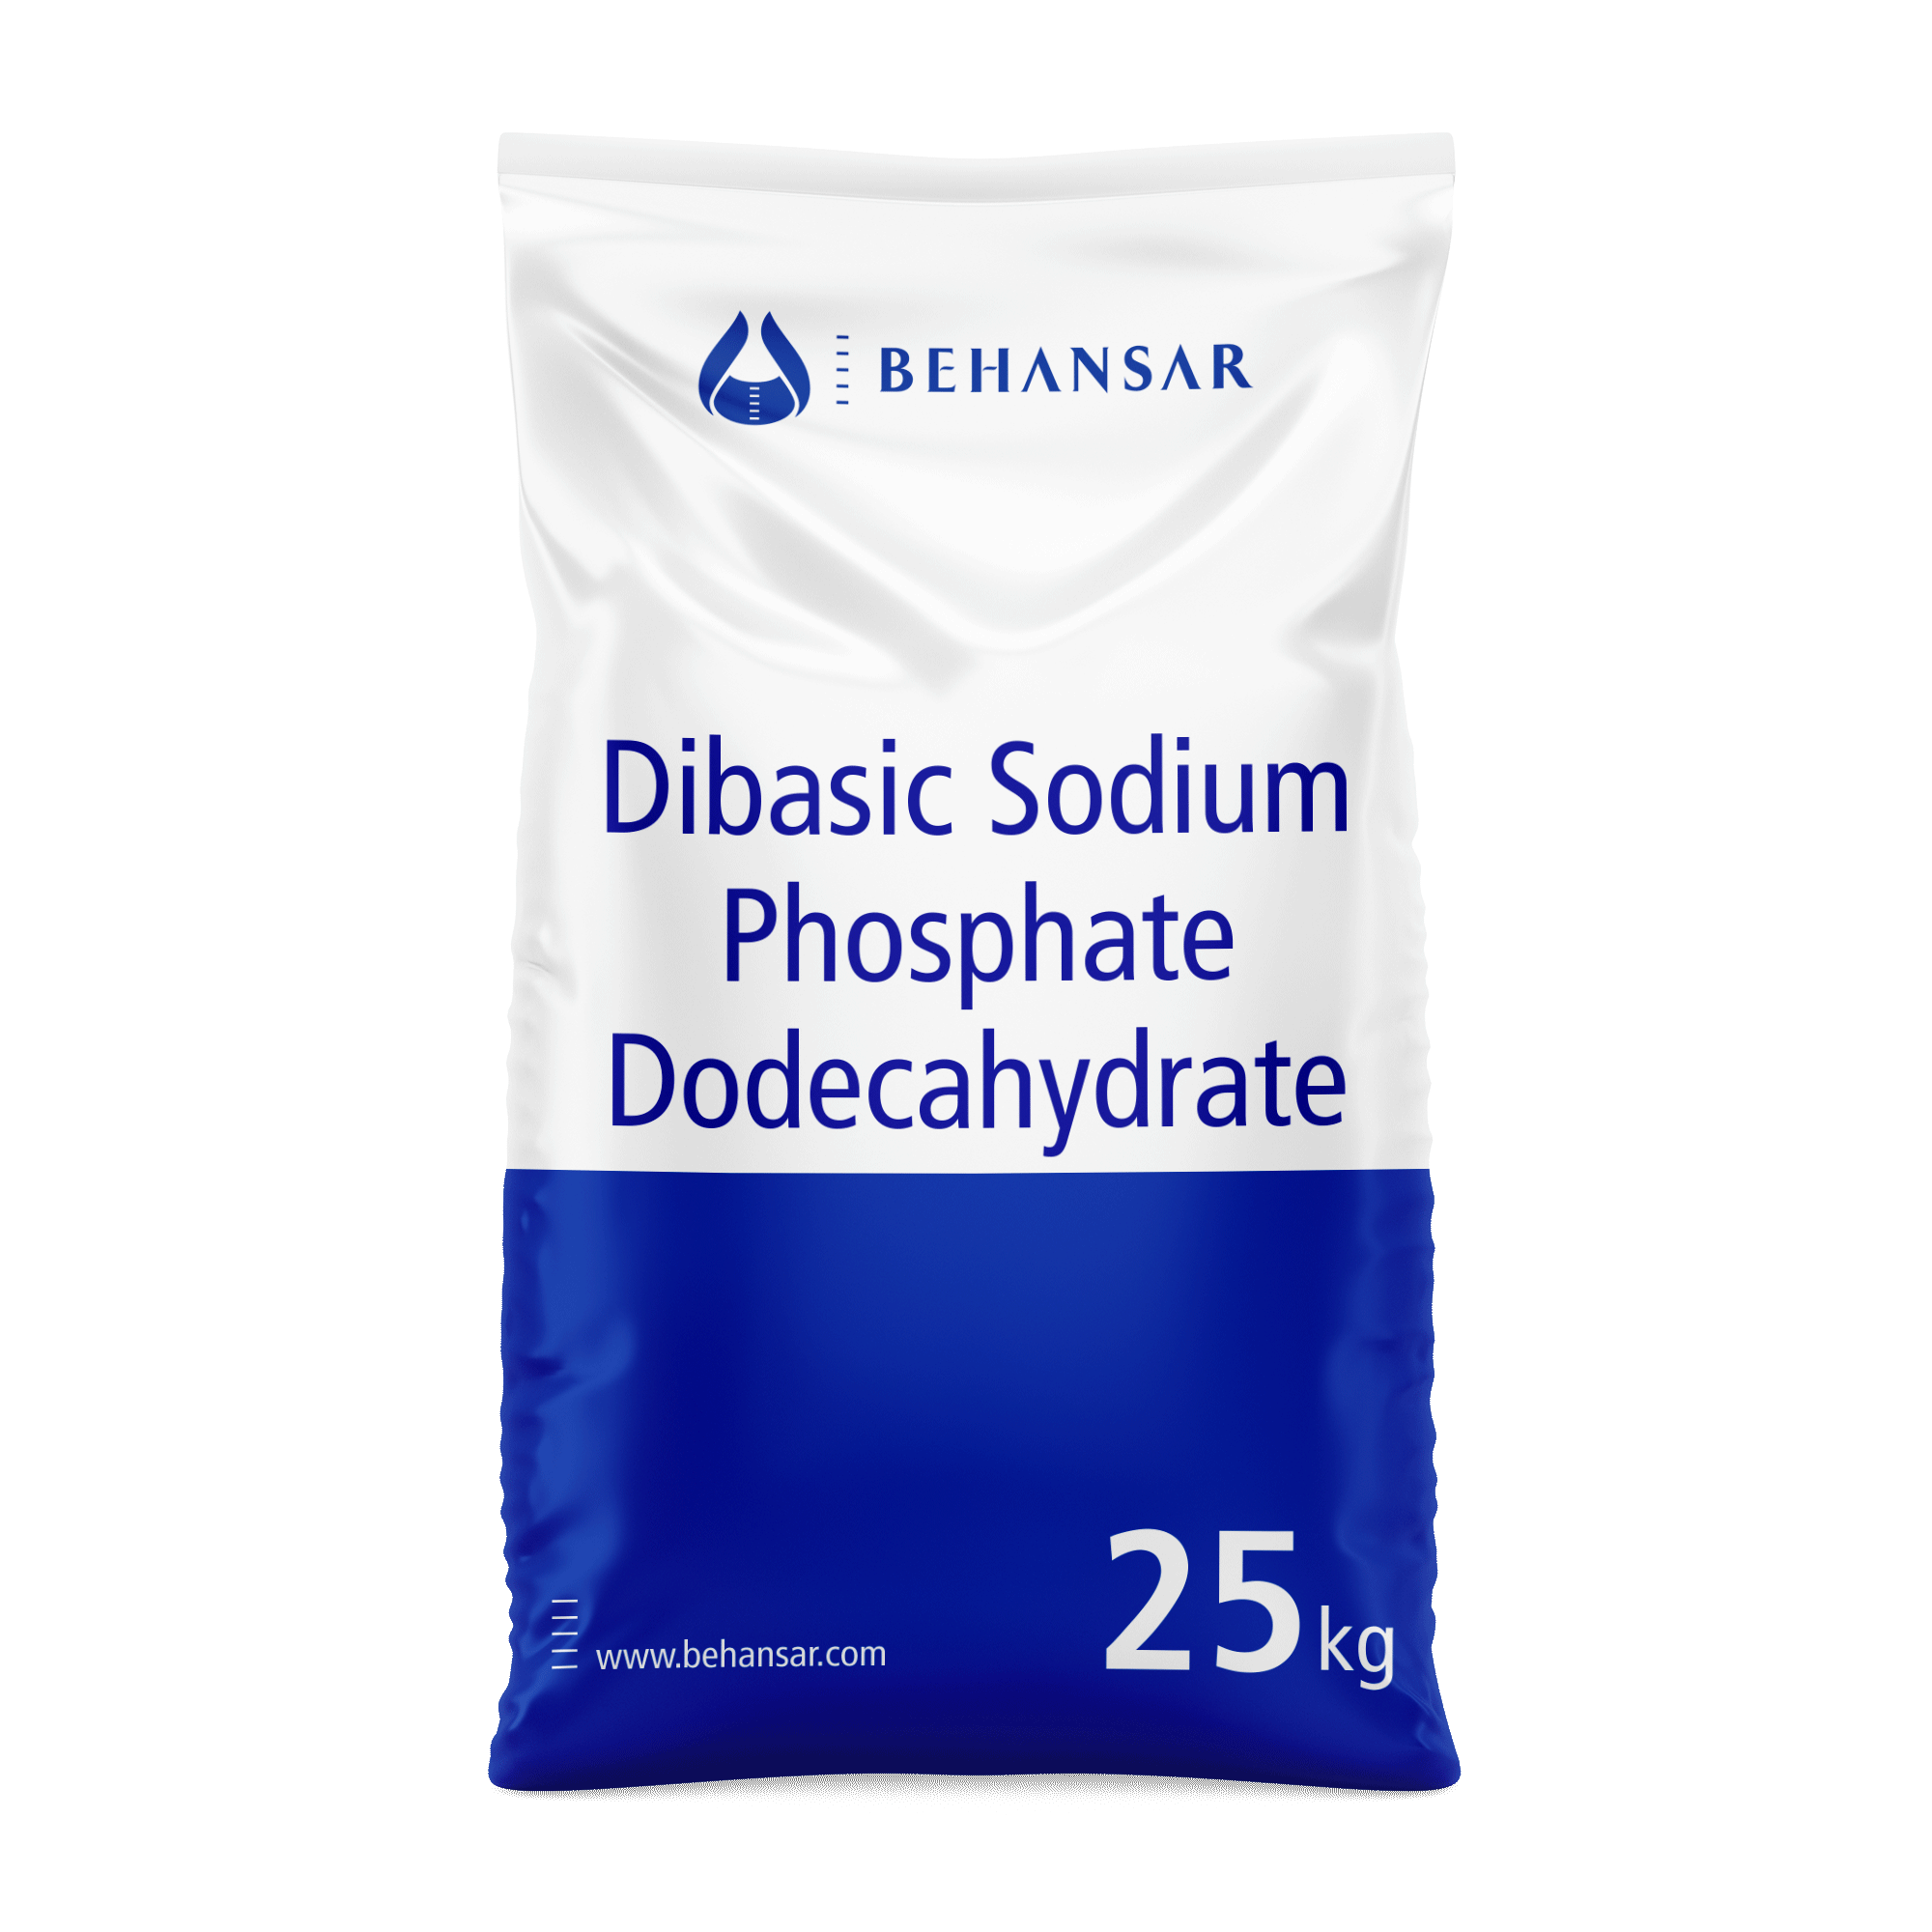 Dibasic Sodium Phosphate Dodecahydrate is one of the products of Behansar Co